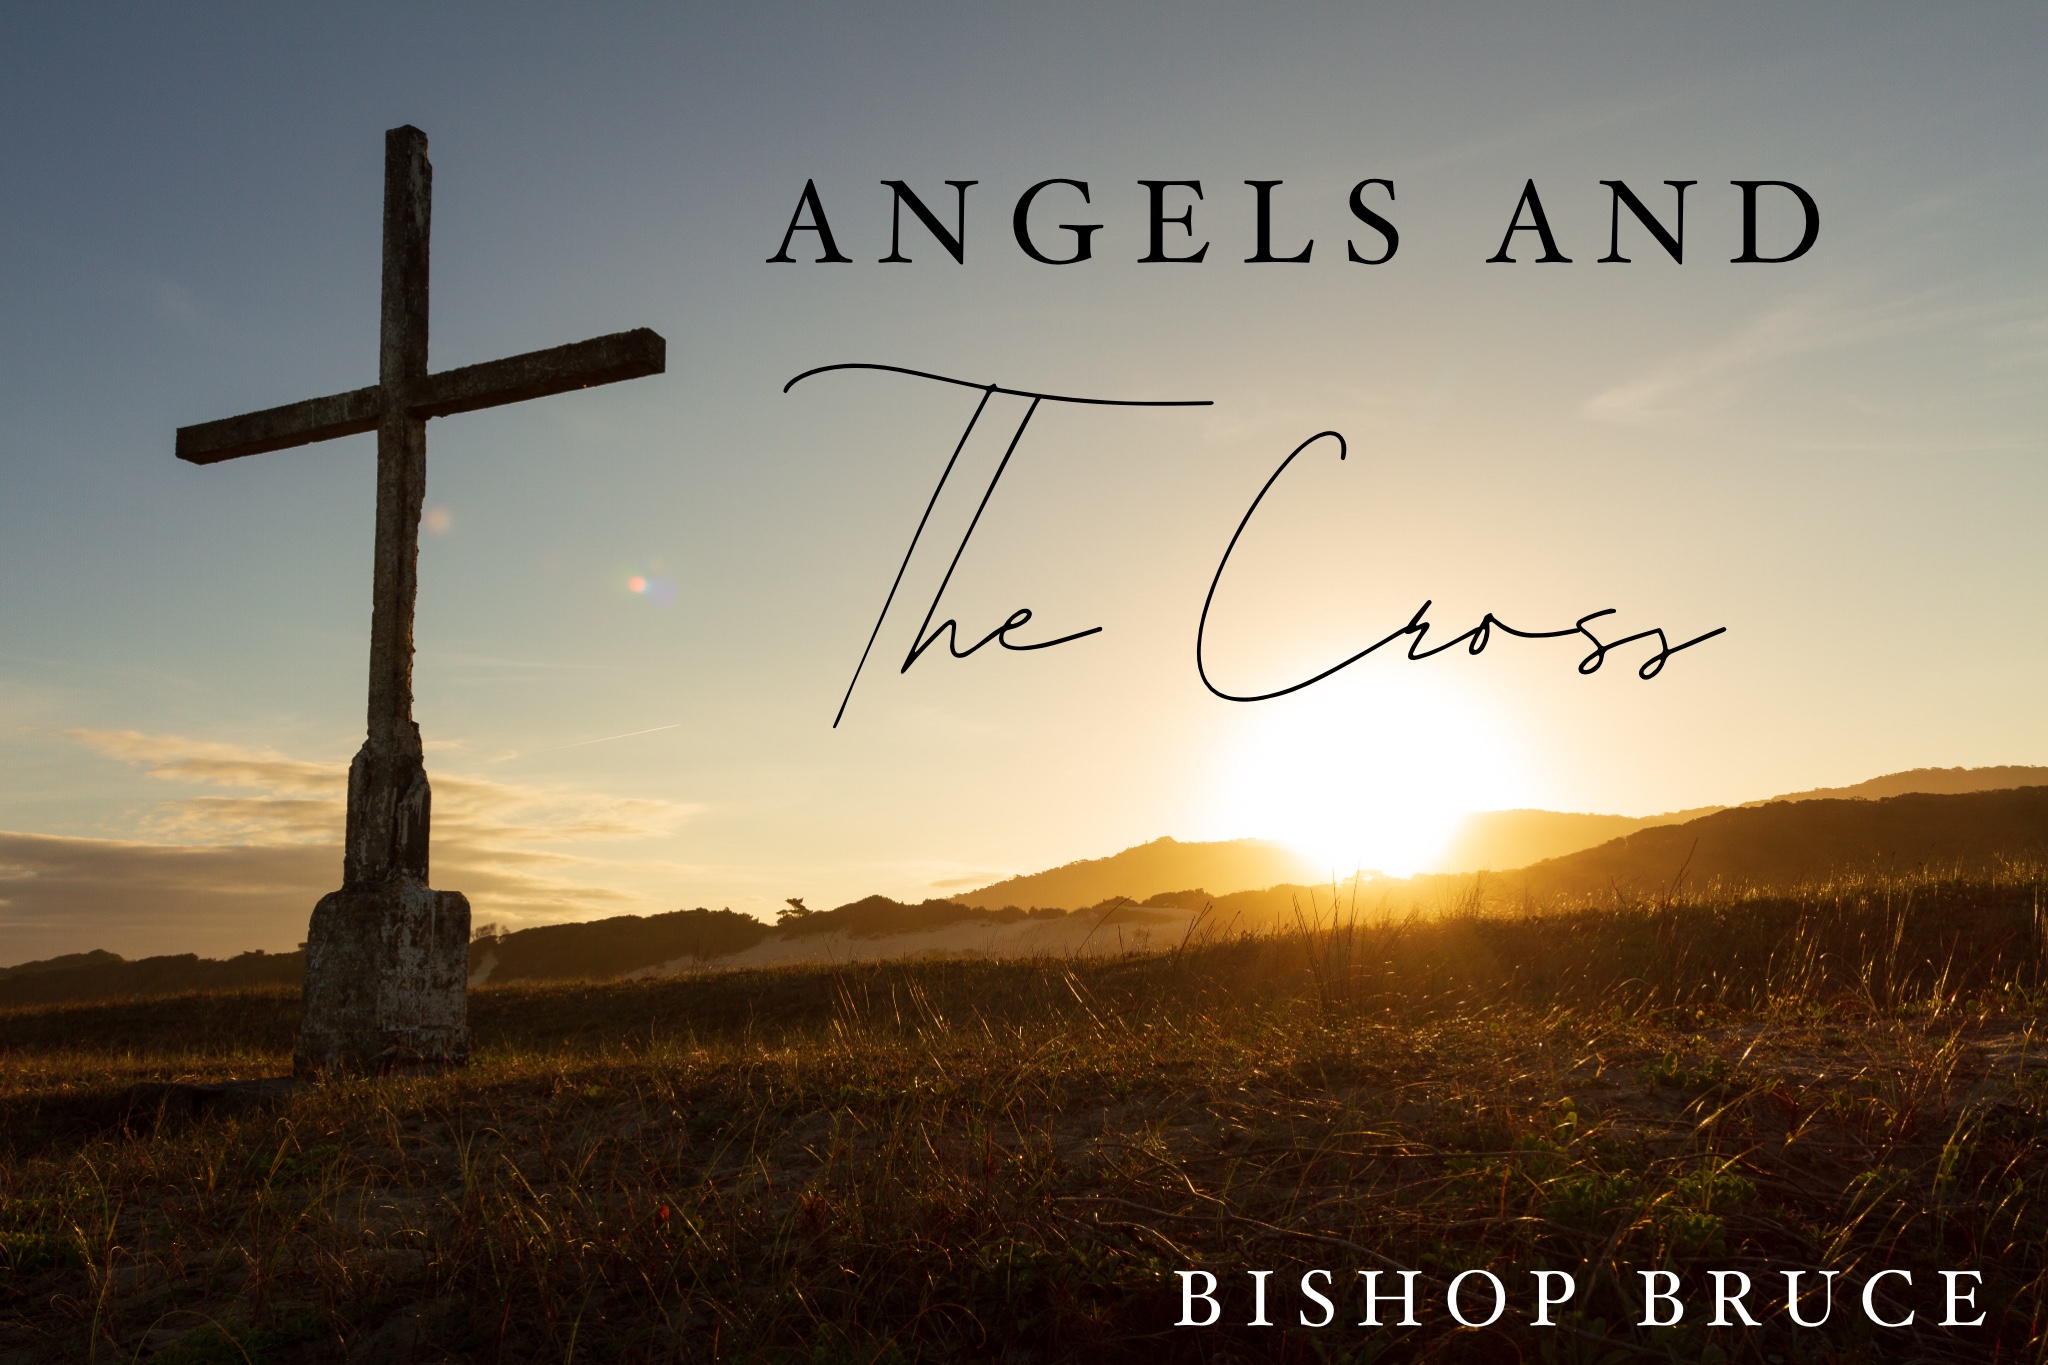 Angels And The Cross Pt. 2